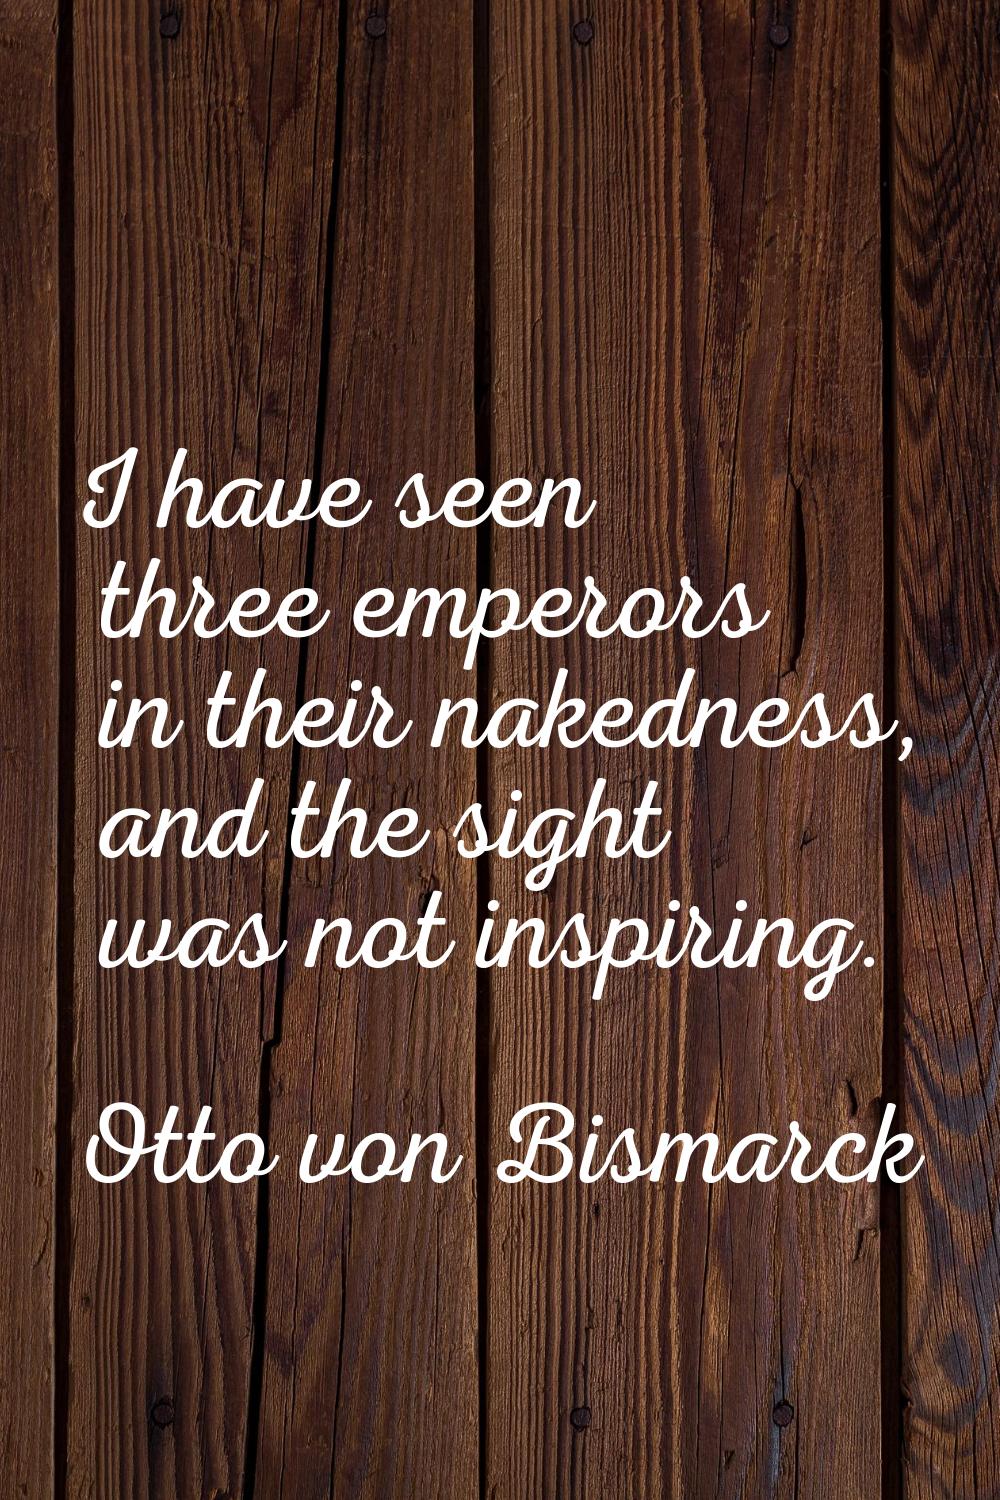 I have seen three emperors in their nakedness, and the sight was not inspiring.